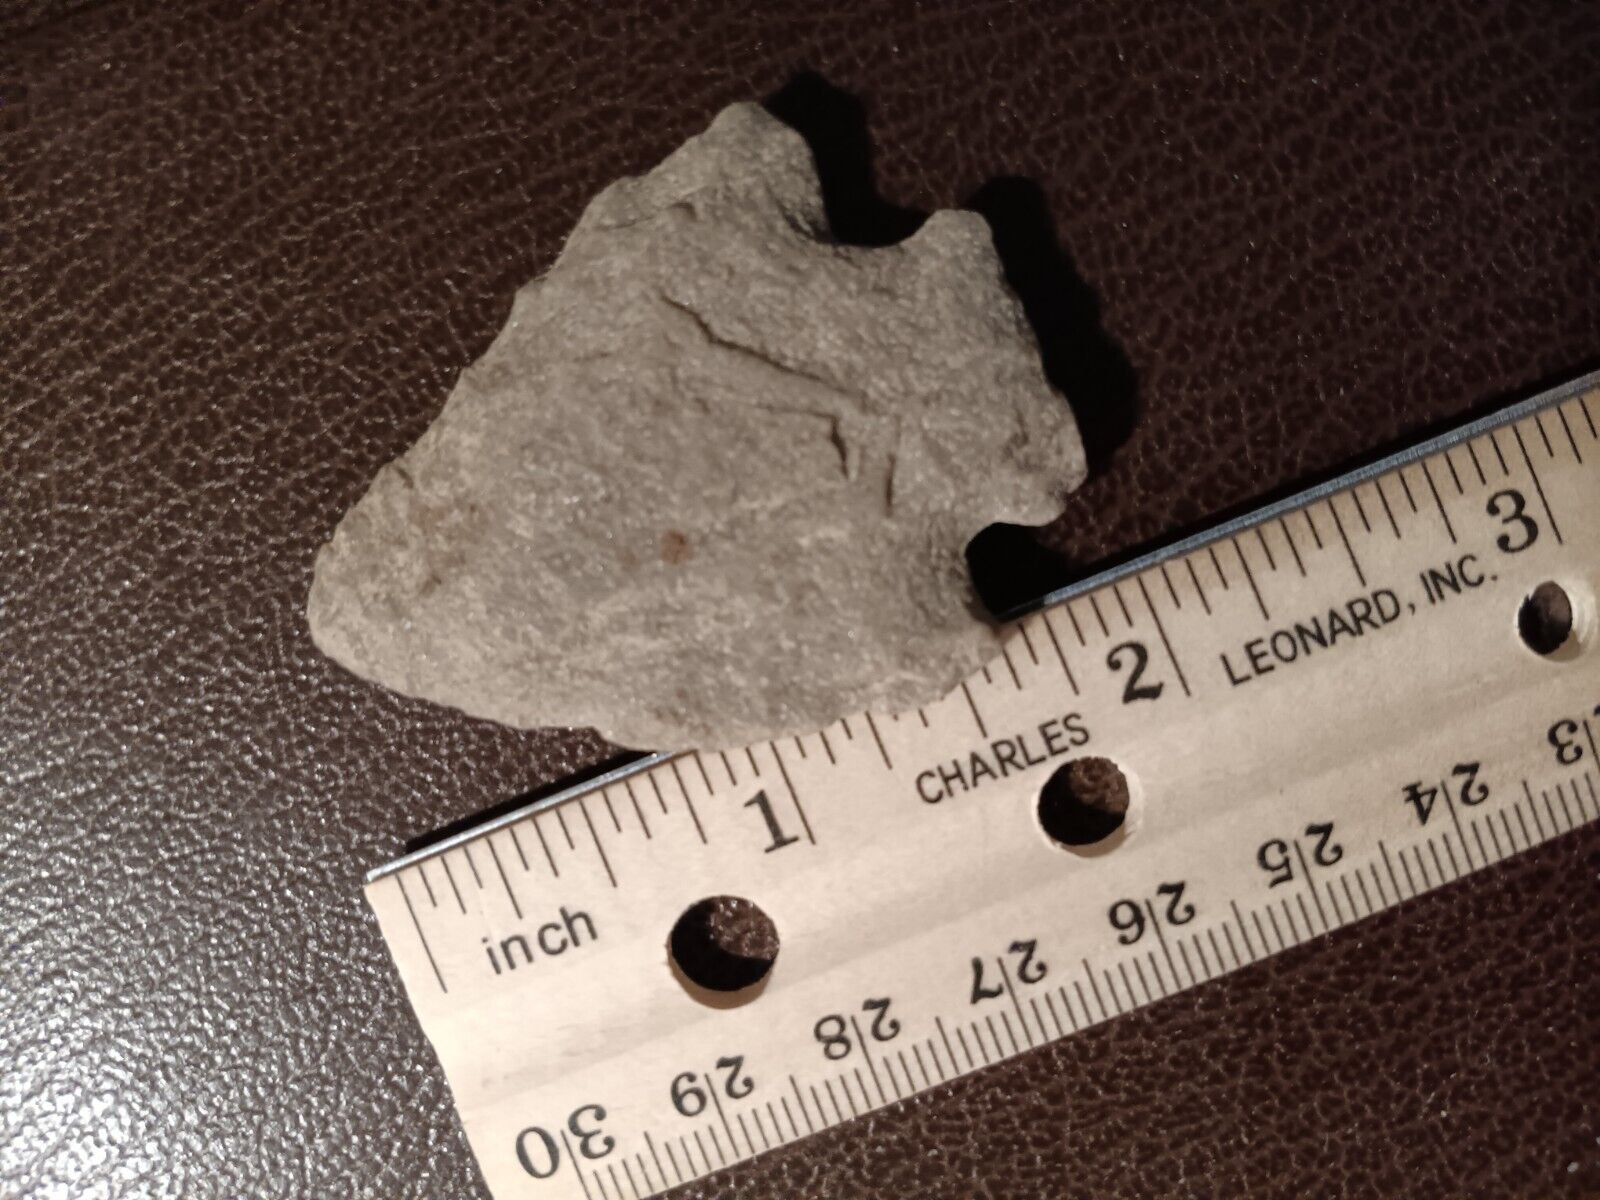 AUTHENTIC NATIVE AMERICAN INDIAN ARTIFACT FOUND, EASTERN N.C.--- DDD/27